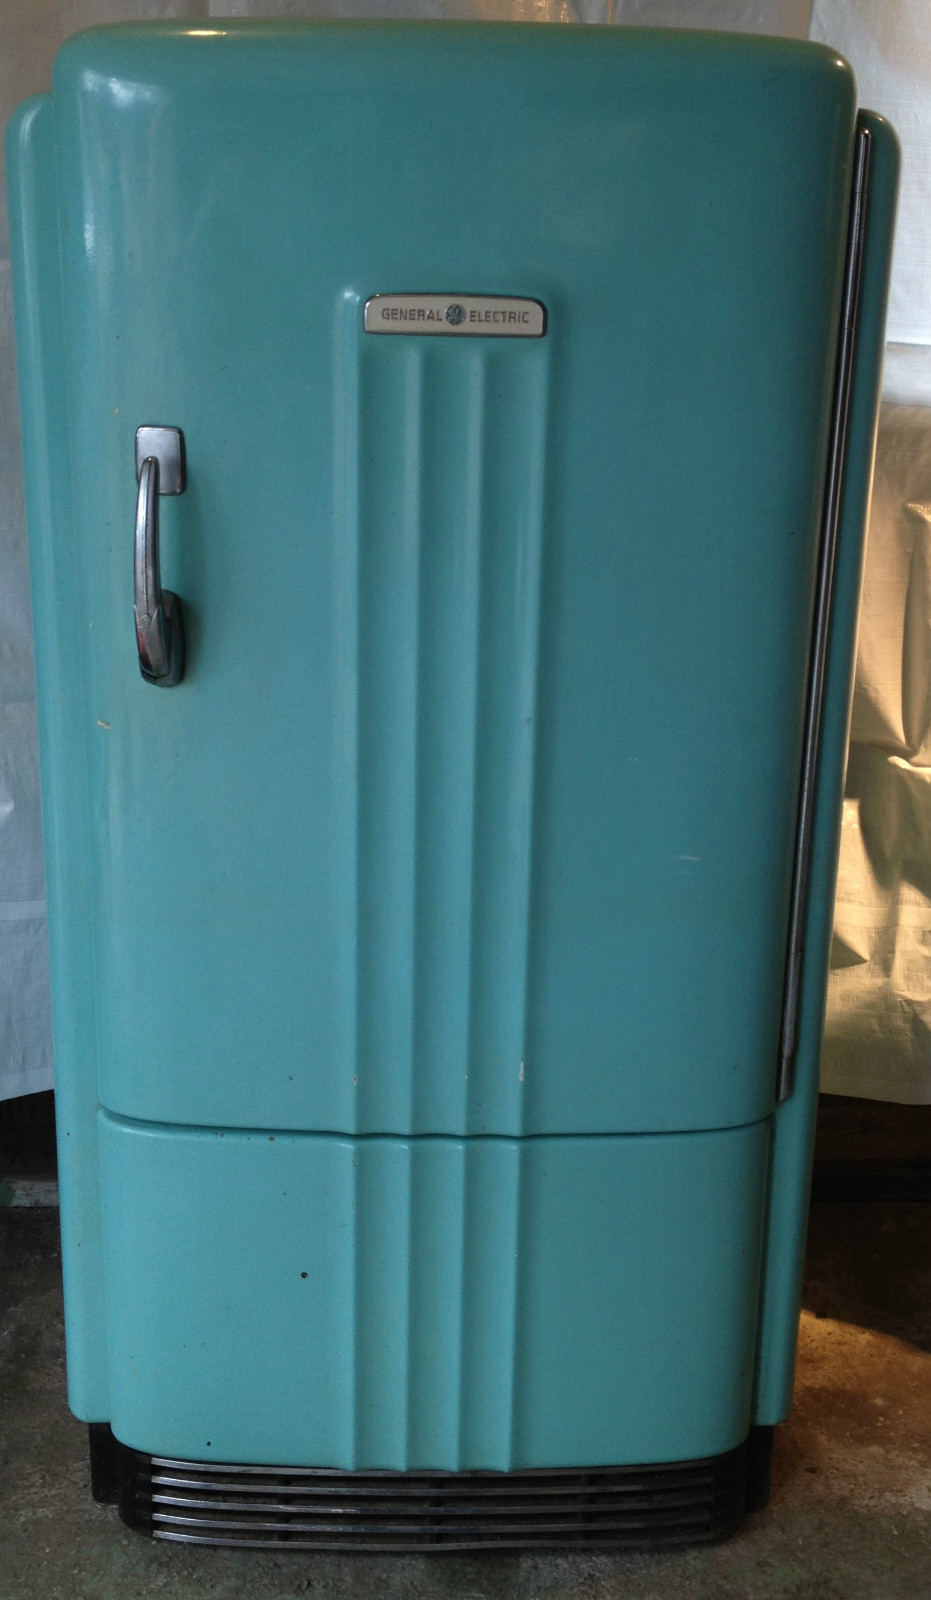 general-electric-refrigerator-1939-model-b6-39-a-in-working-condition